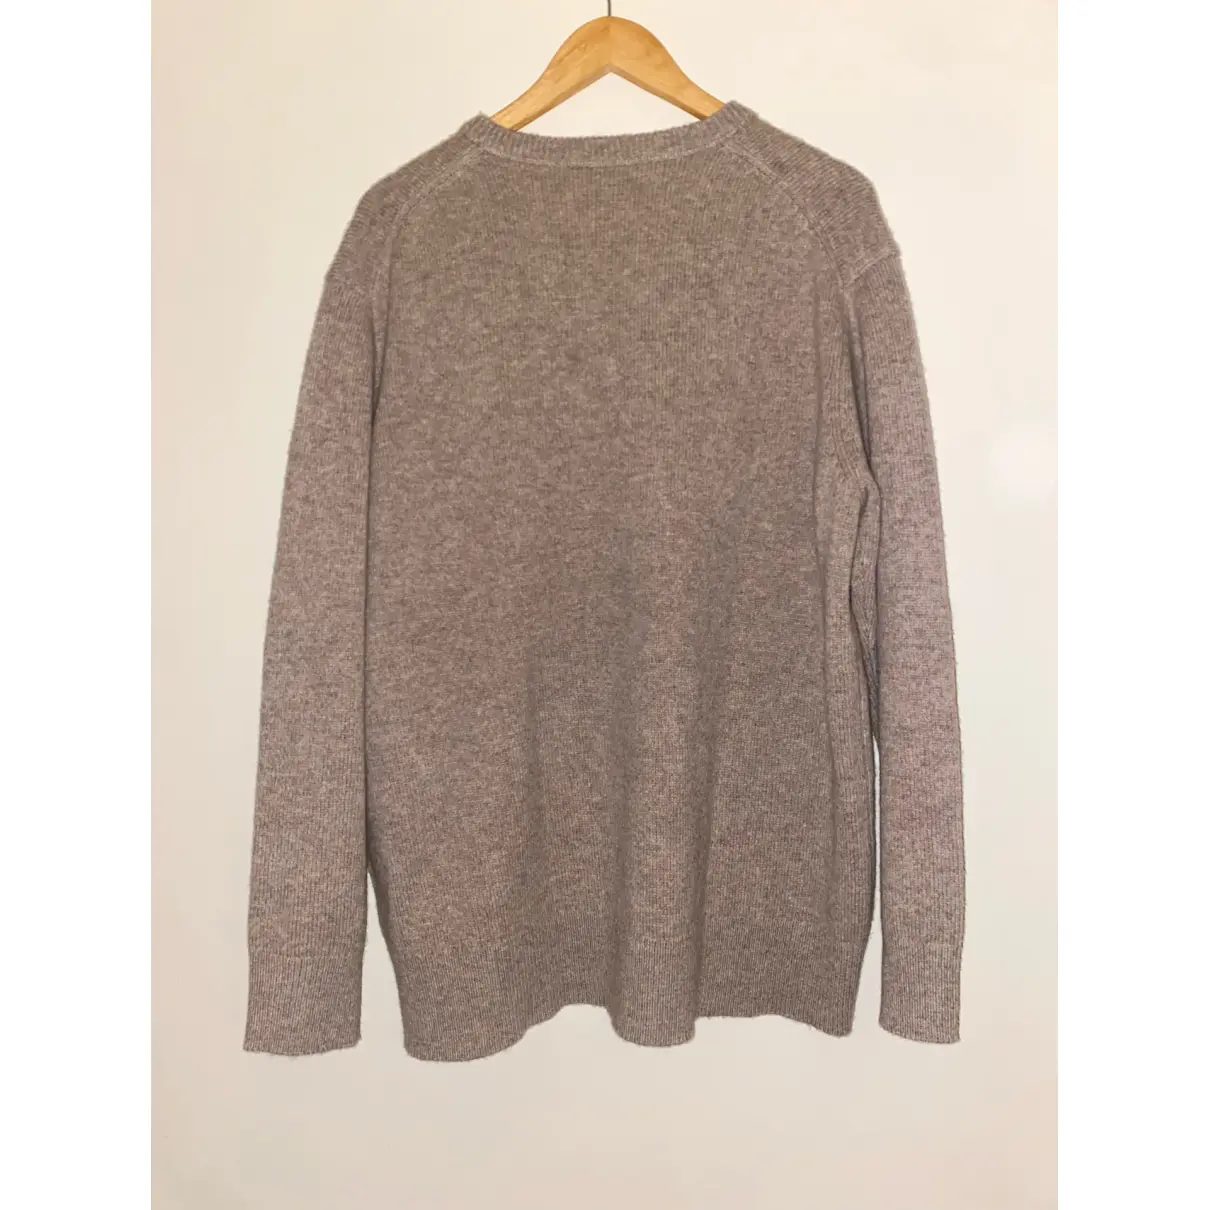 Buy Acne Studios Cashmere pull online